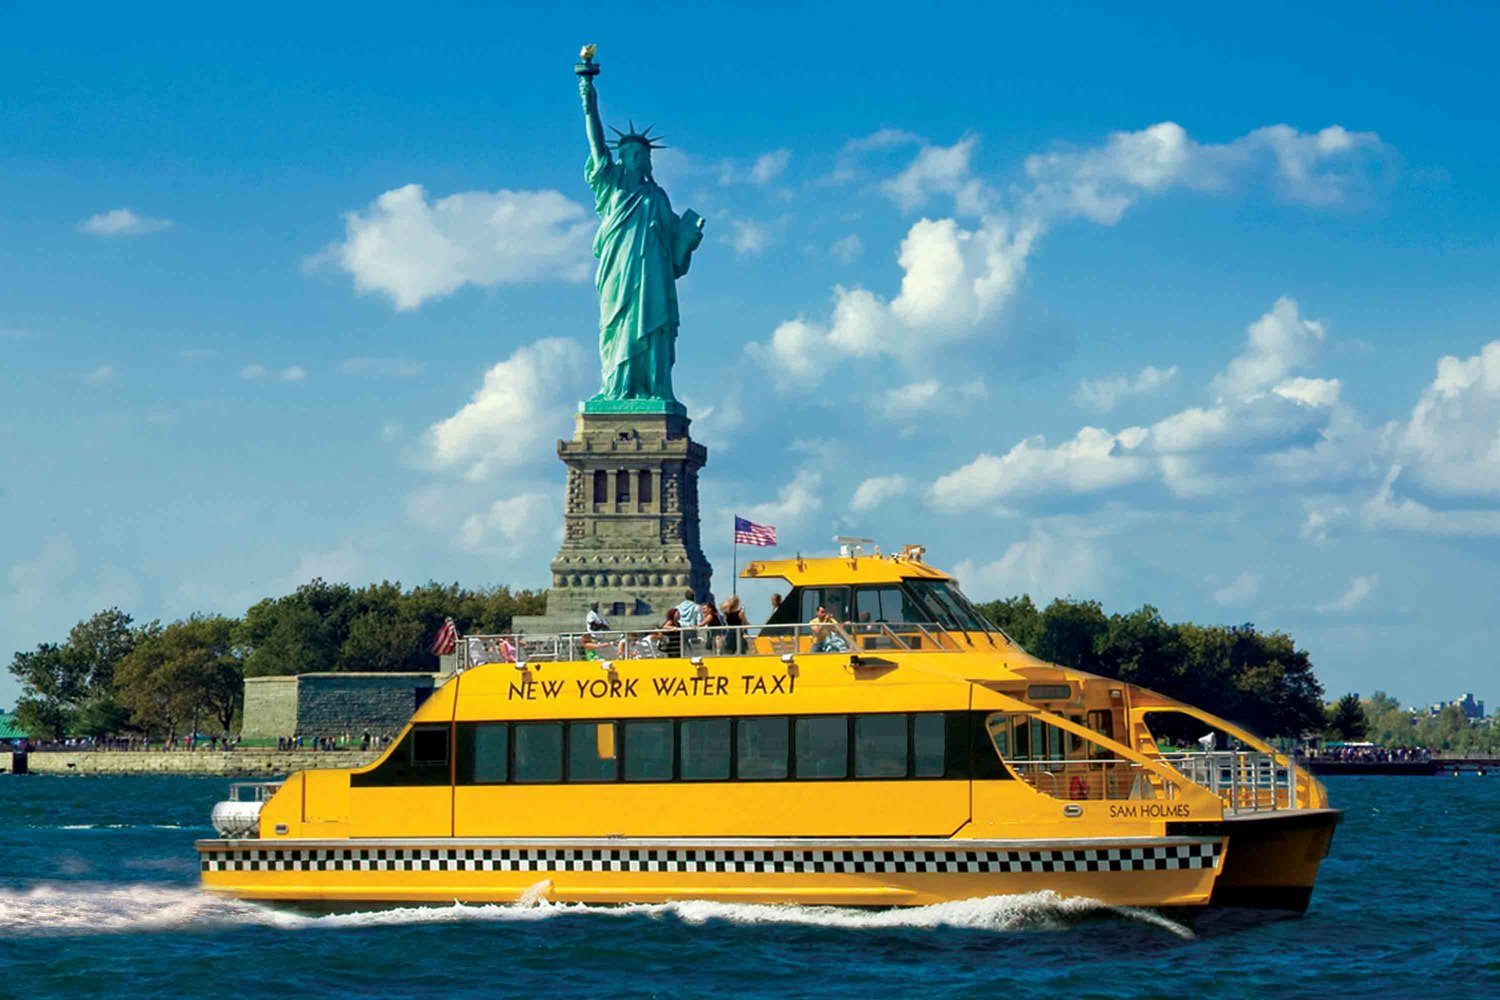 New York Water Taxi in front of the Statue of Liberty.